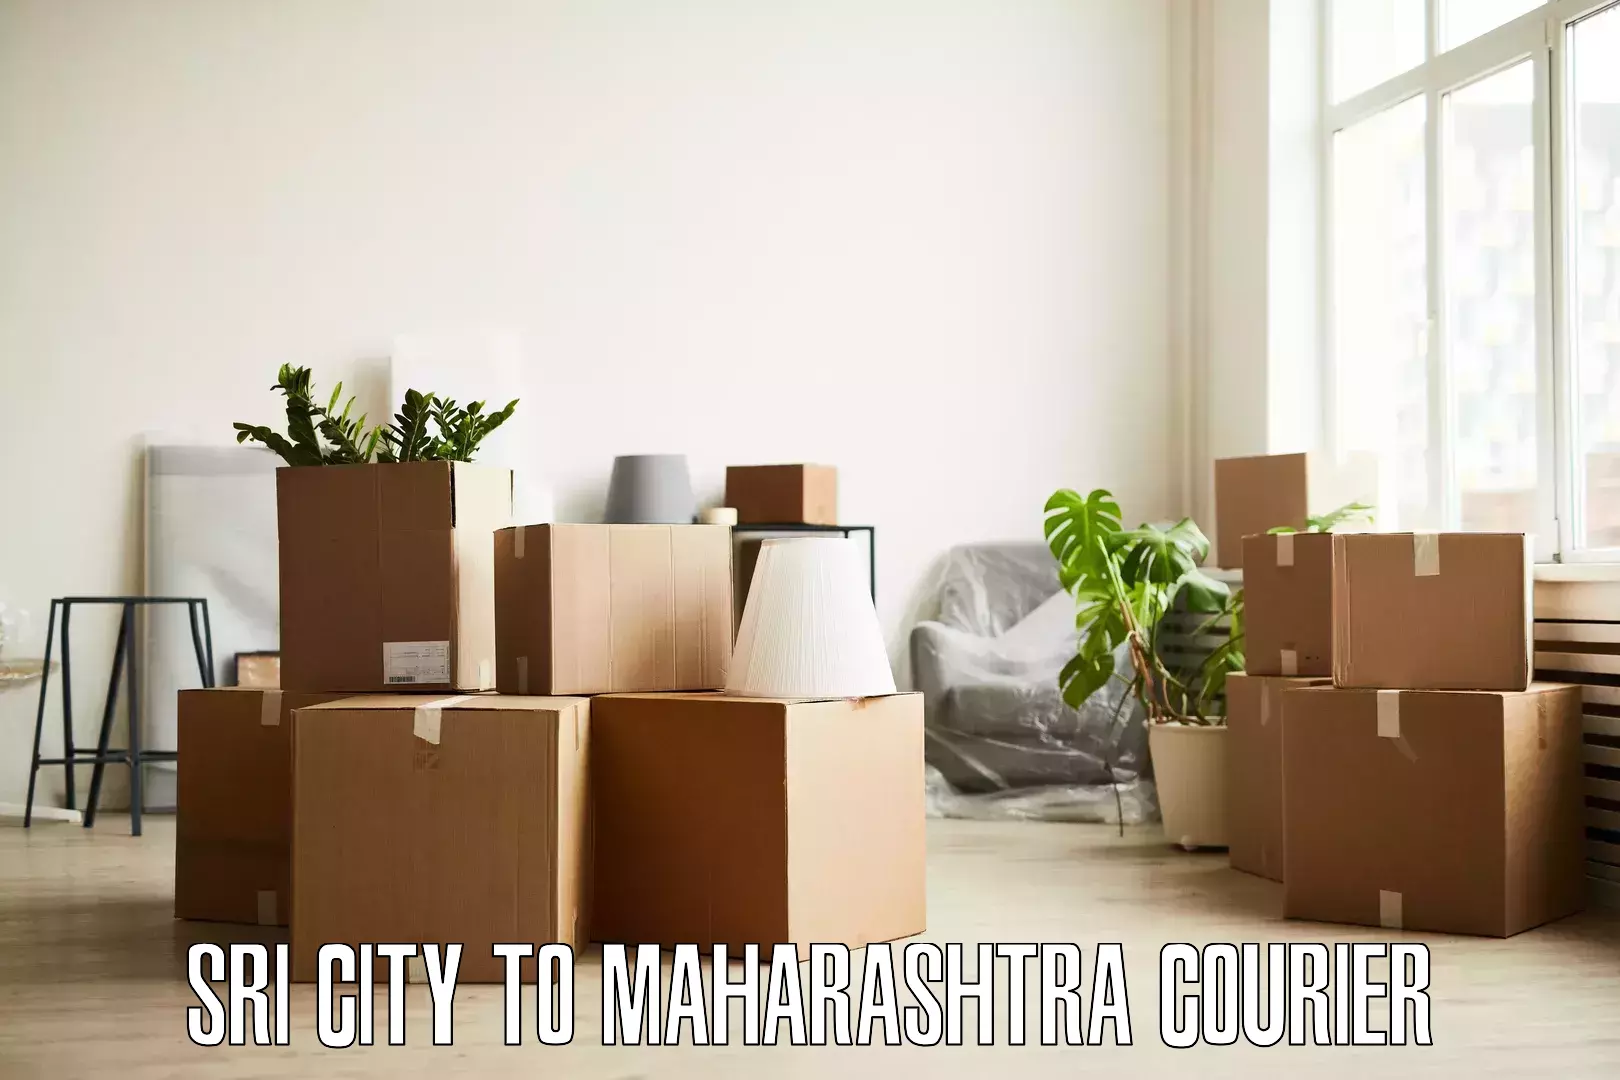 Moving and handling services Sri City to Paratwada